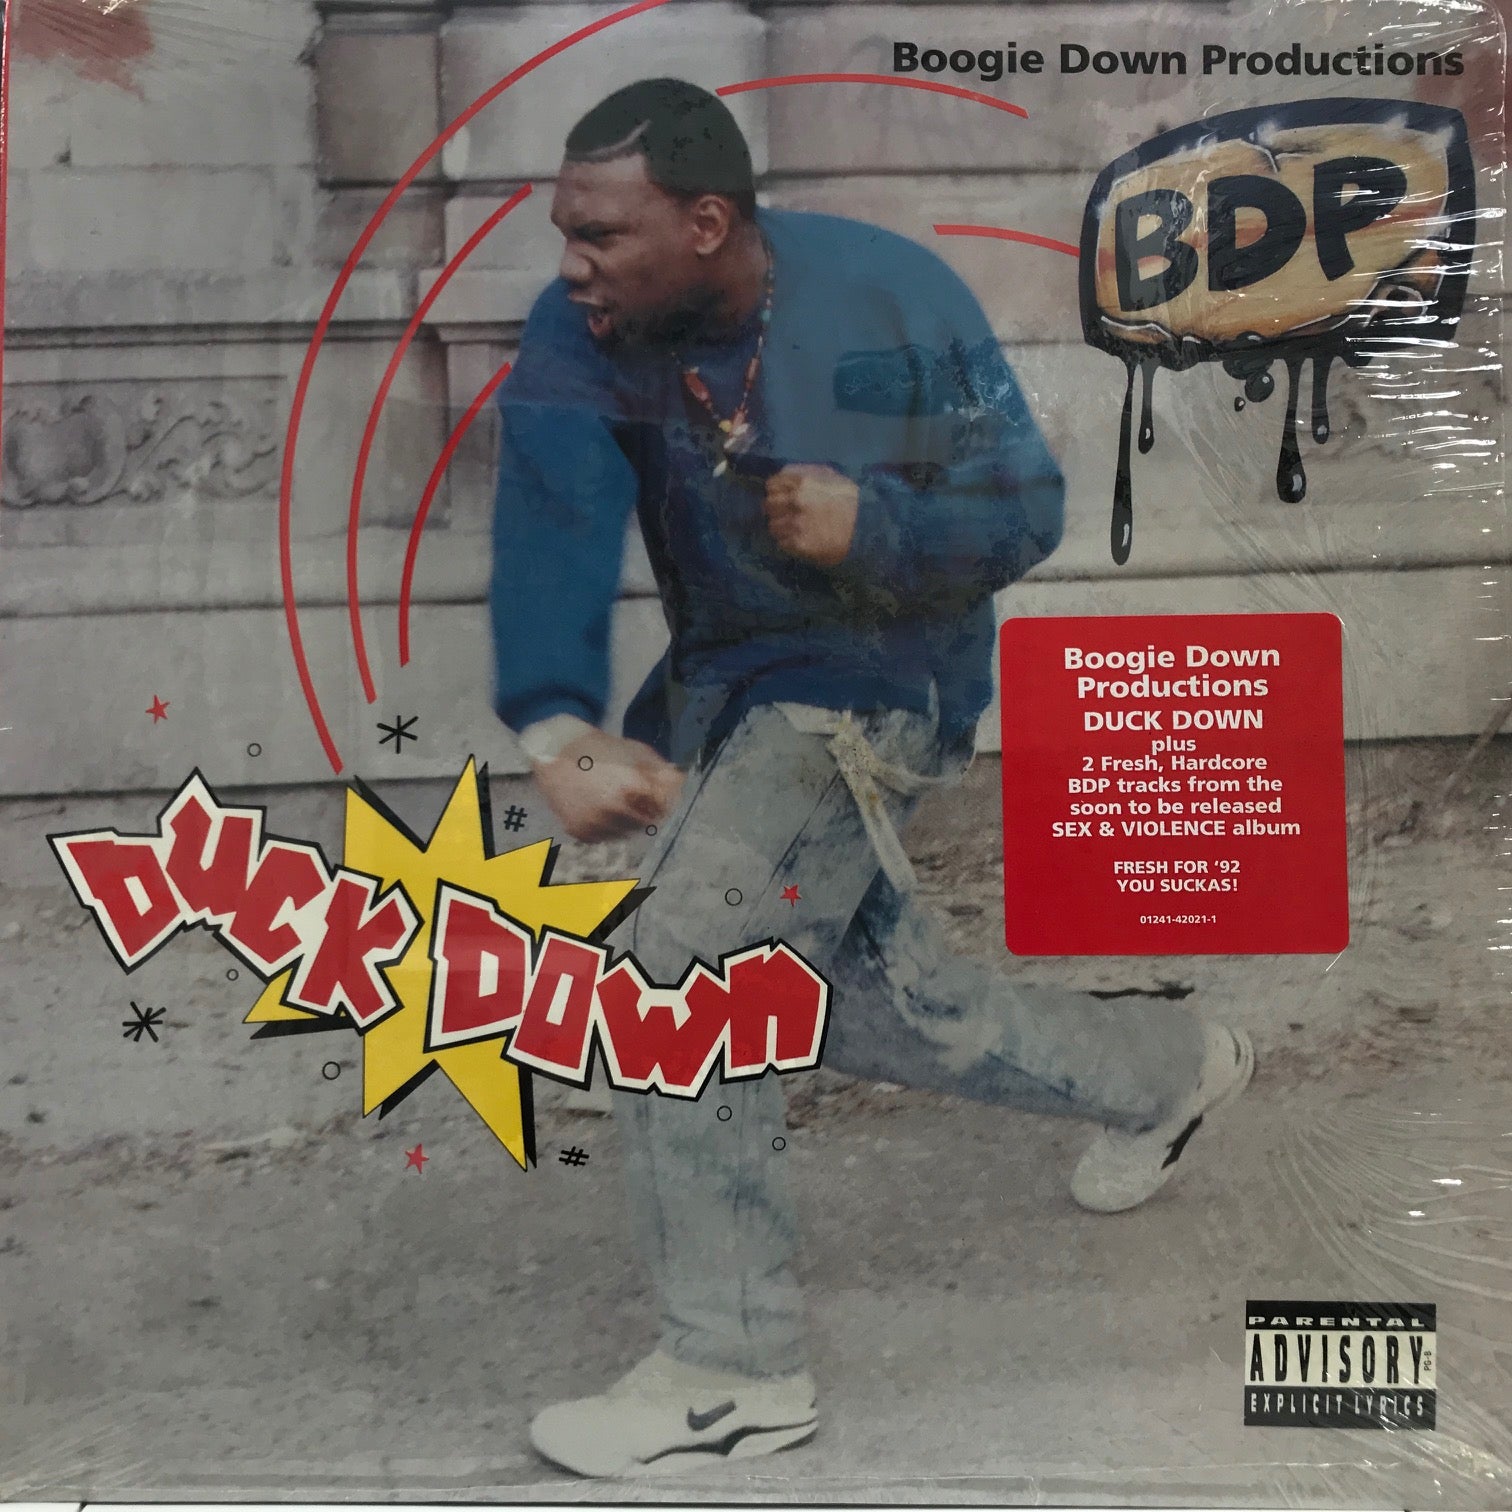 BOOGIE DOWN PRODUCTIONS ロゴパーカー 米国サイズ各色